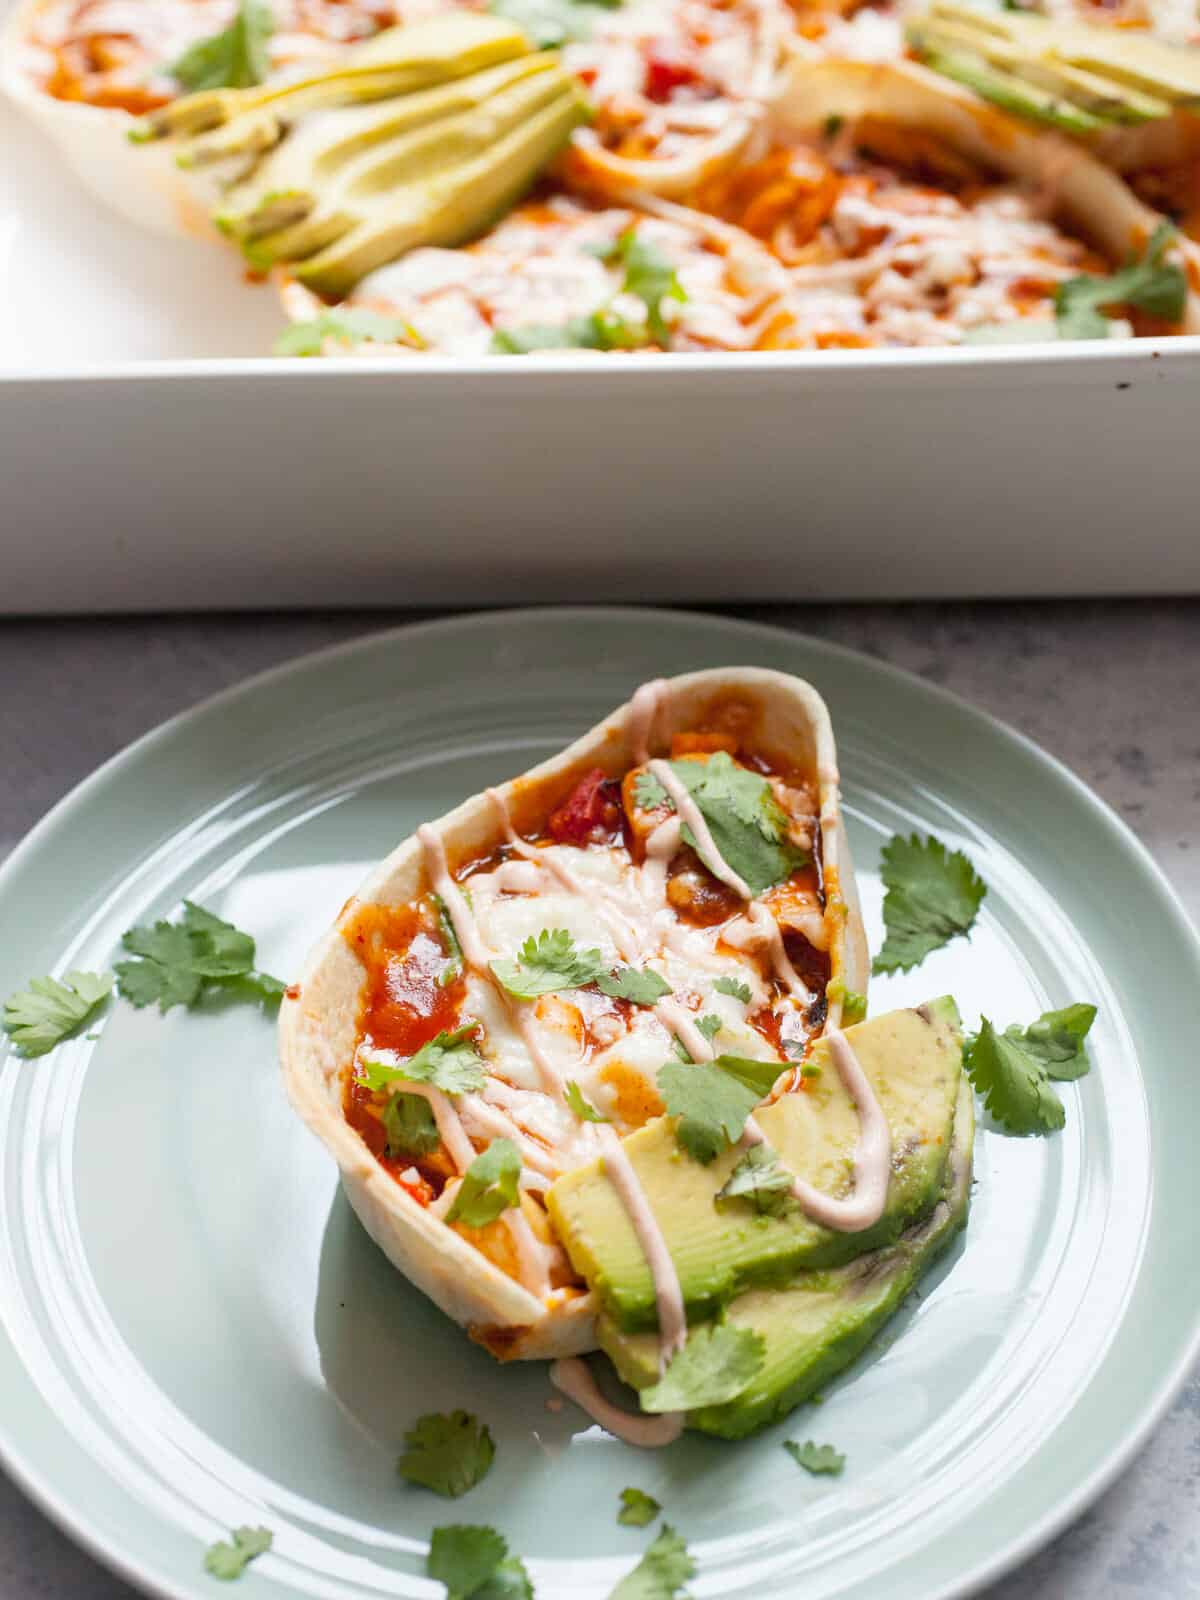 Pulled Chicken Enchilada Taco Boats: These easy baked taco boats have all the delicious flavors of a classic chicken enchilada dish but are about half the work! YUM! | macheesmo.com